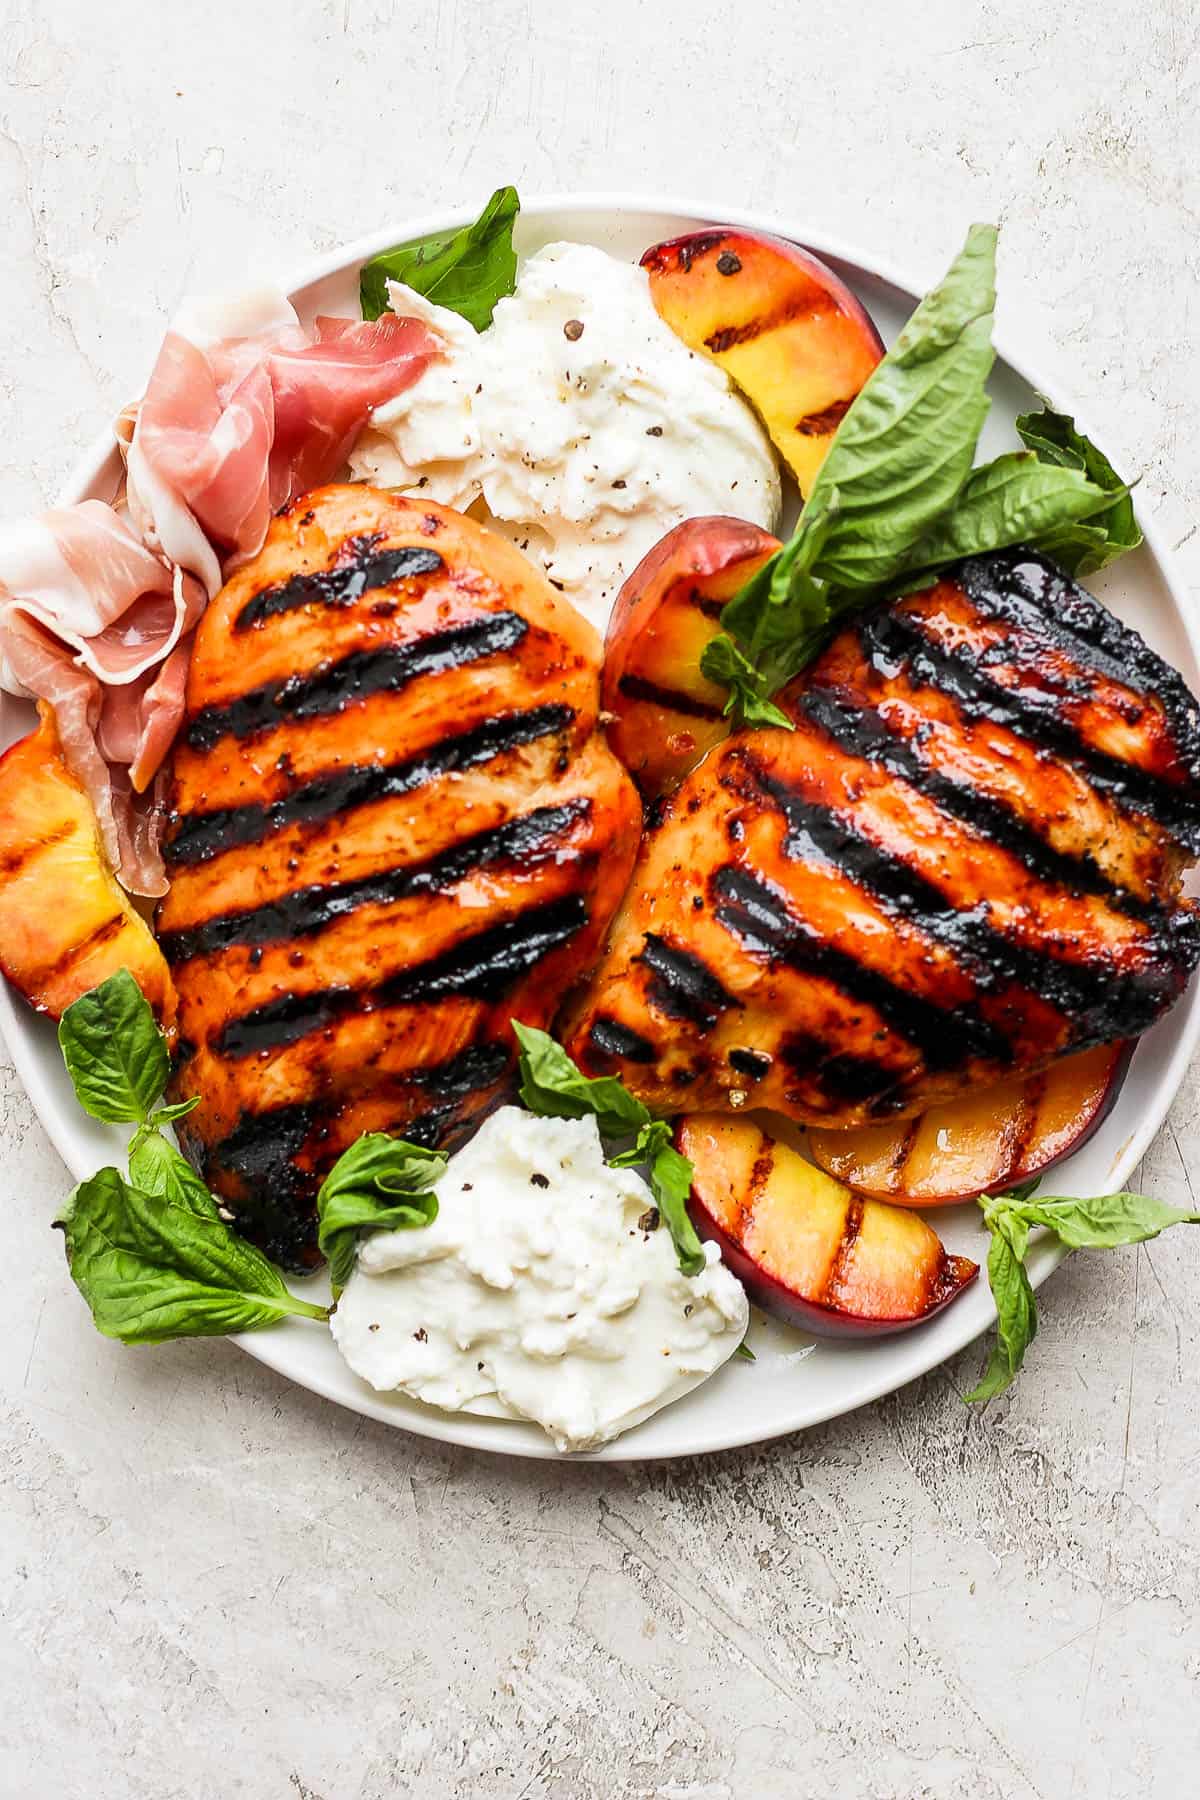 Two grilled chicken breasts surrounded by grilled peaches, burrata cheese, prosciutto, and fresh basil leaves.